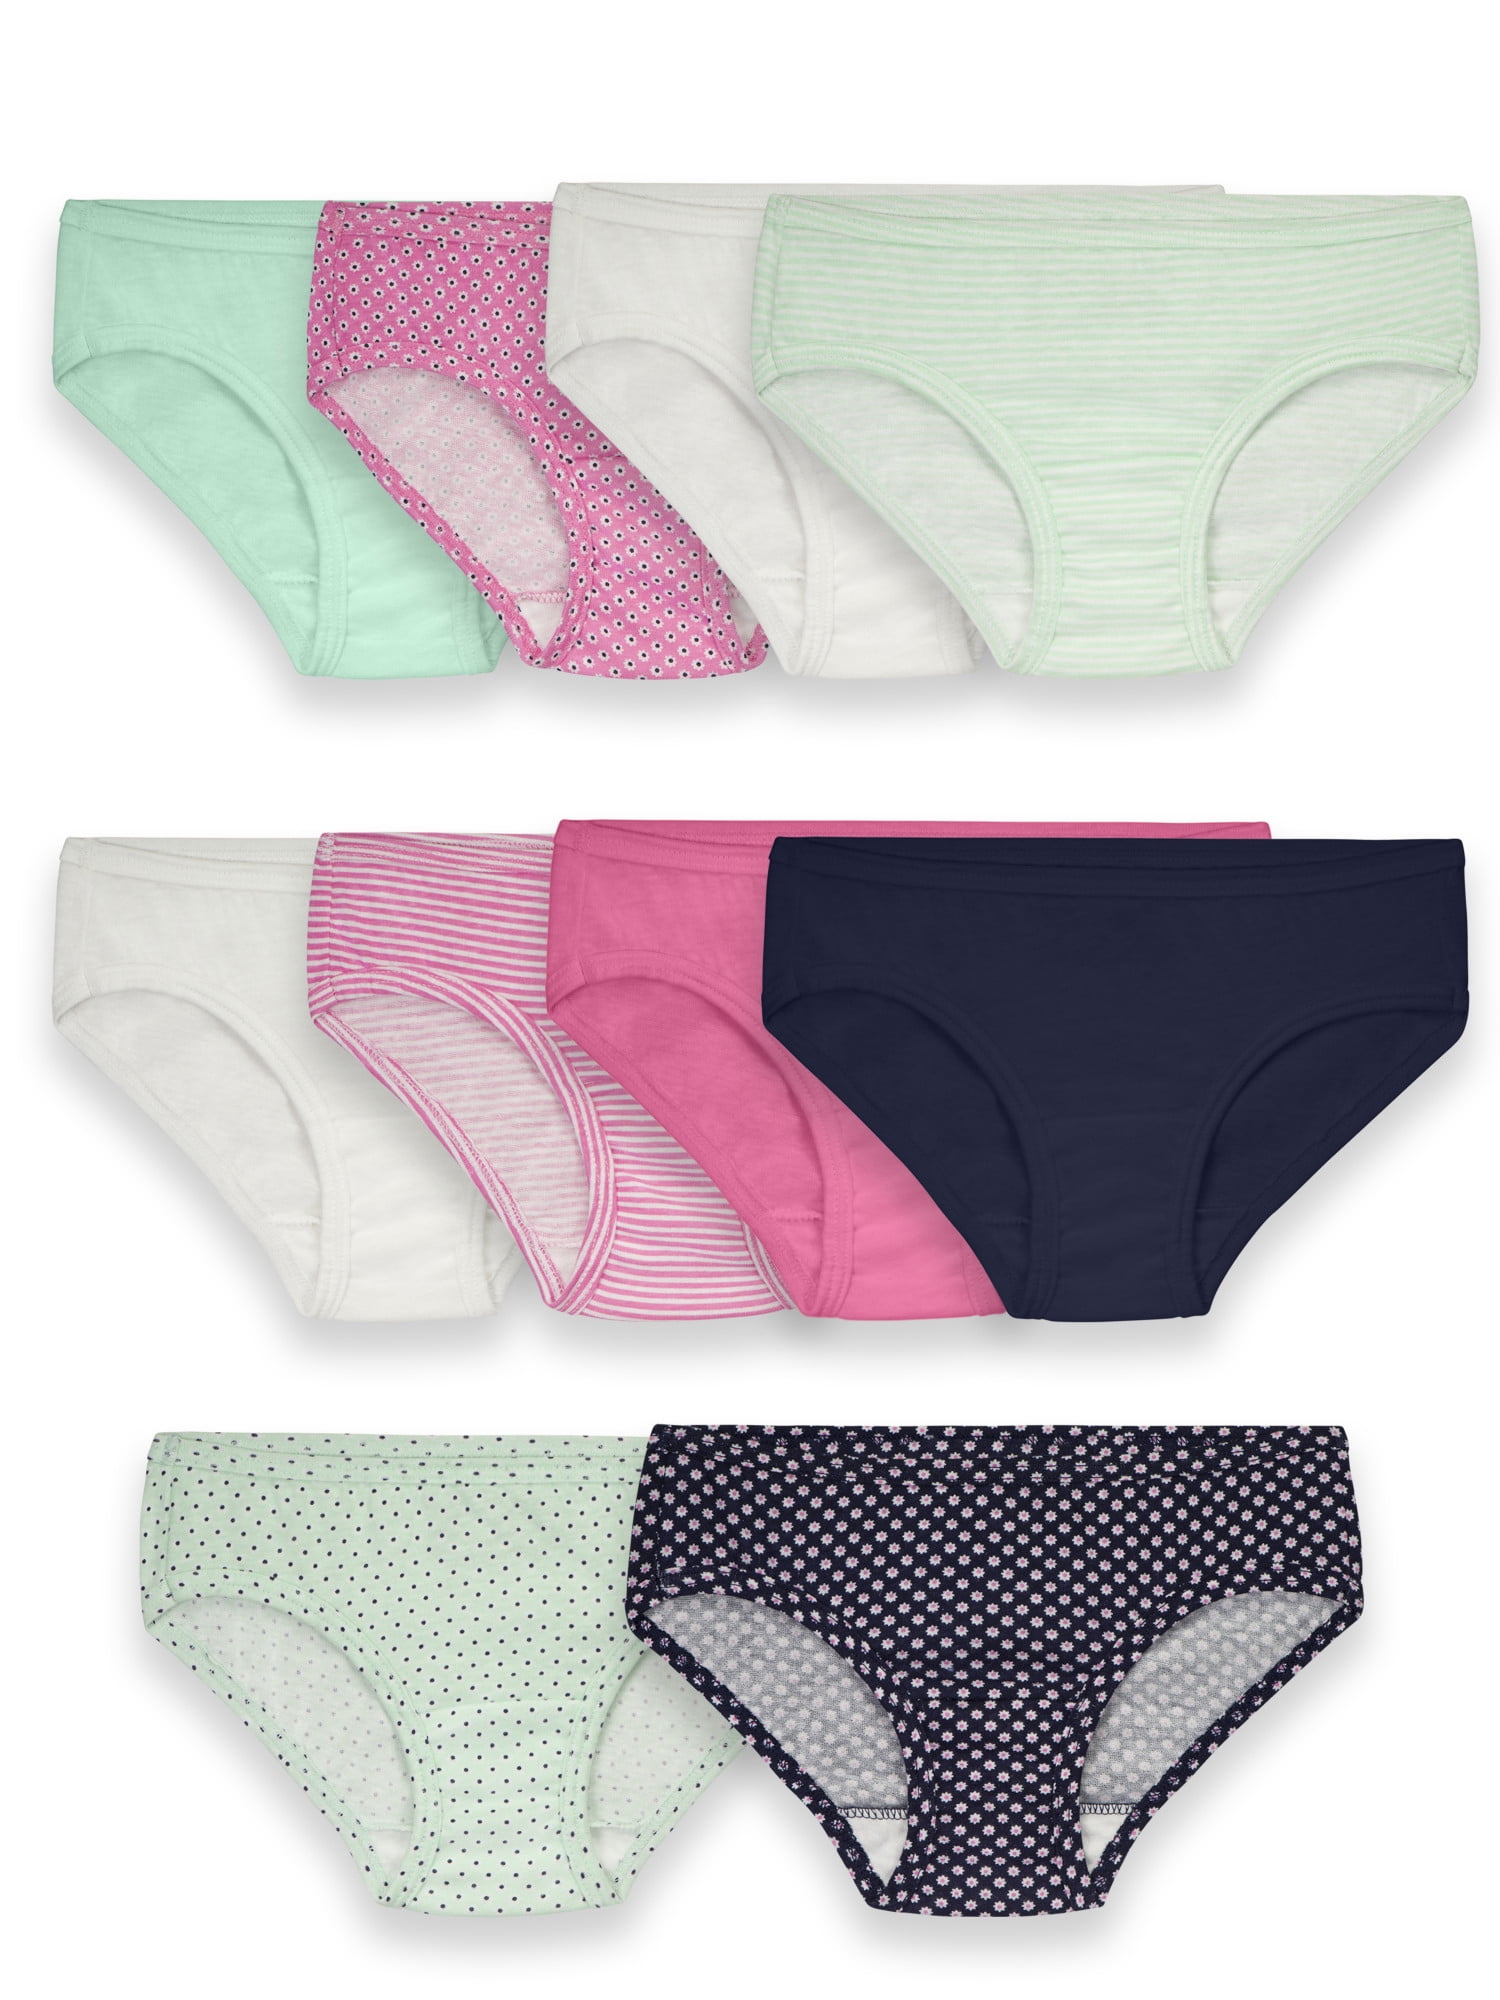 Fruit of the Loom Girls' Assorted Cotton Hipster Underwear, 10 Pack Panties  Sizes 4 - 14 